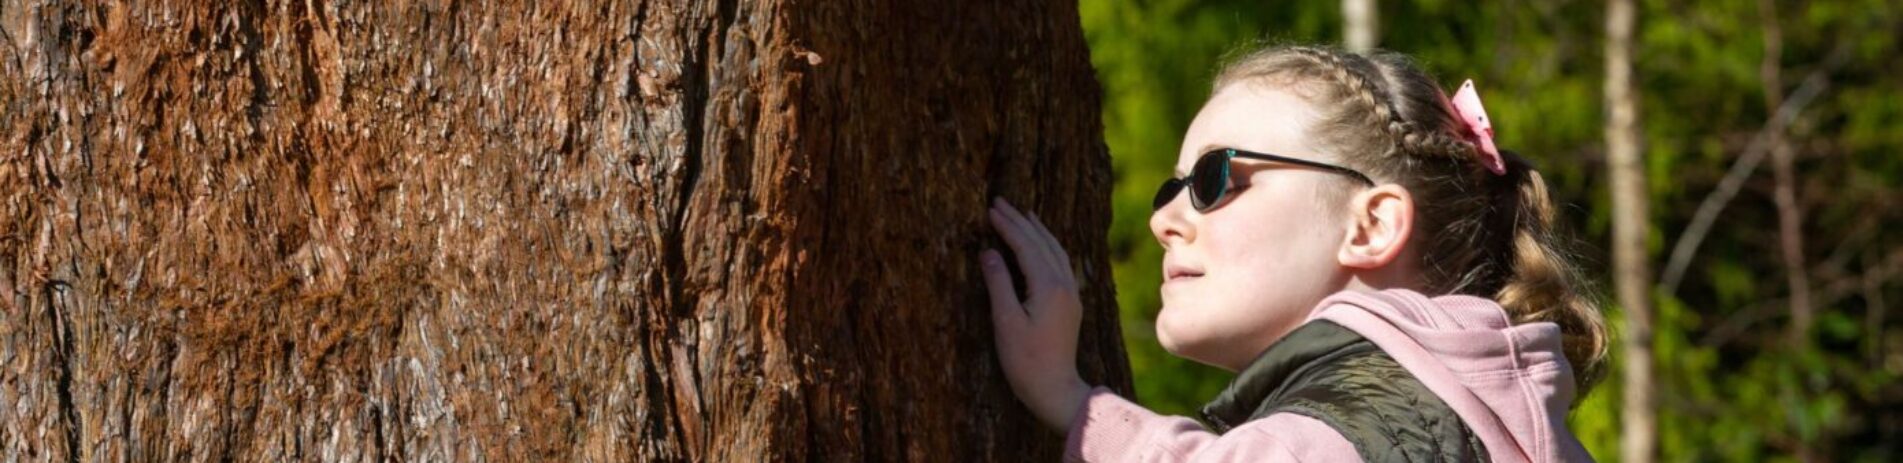 child in dark glasses touching the bark of a tree